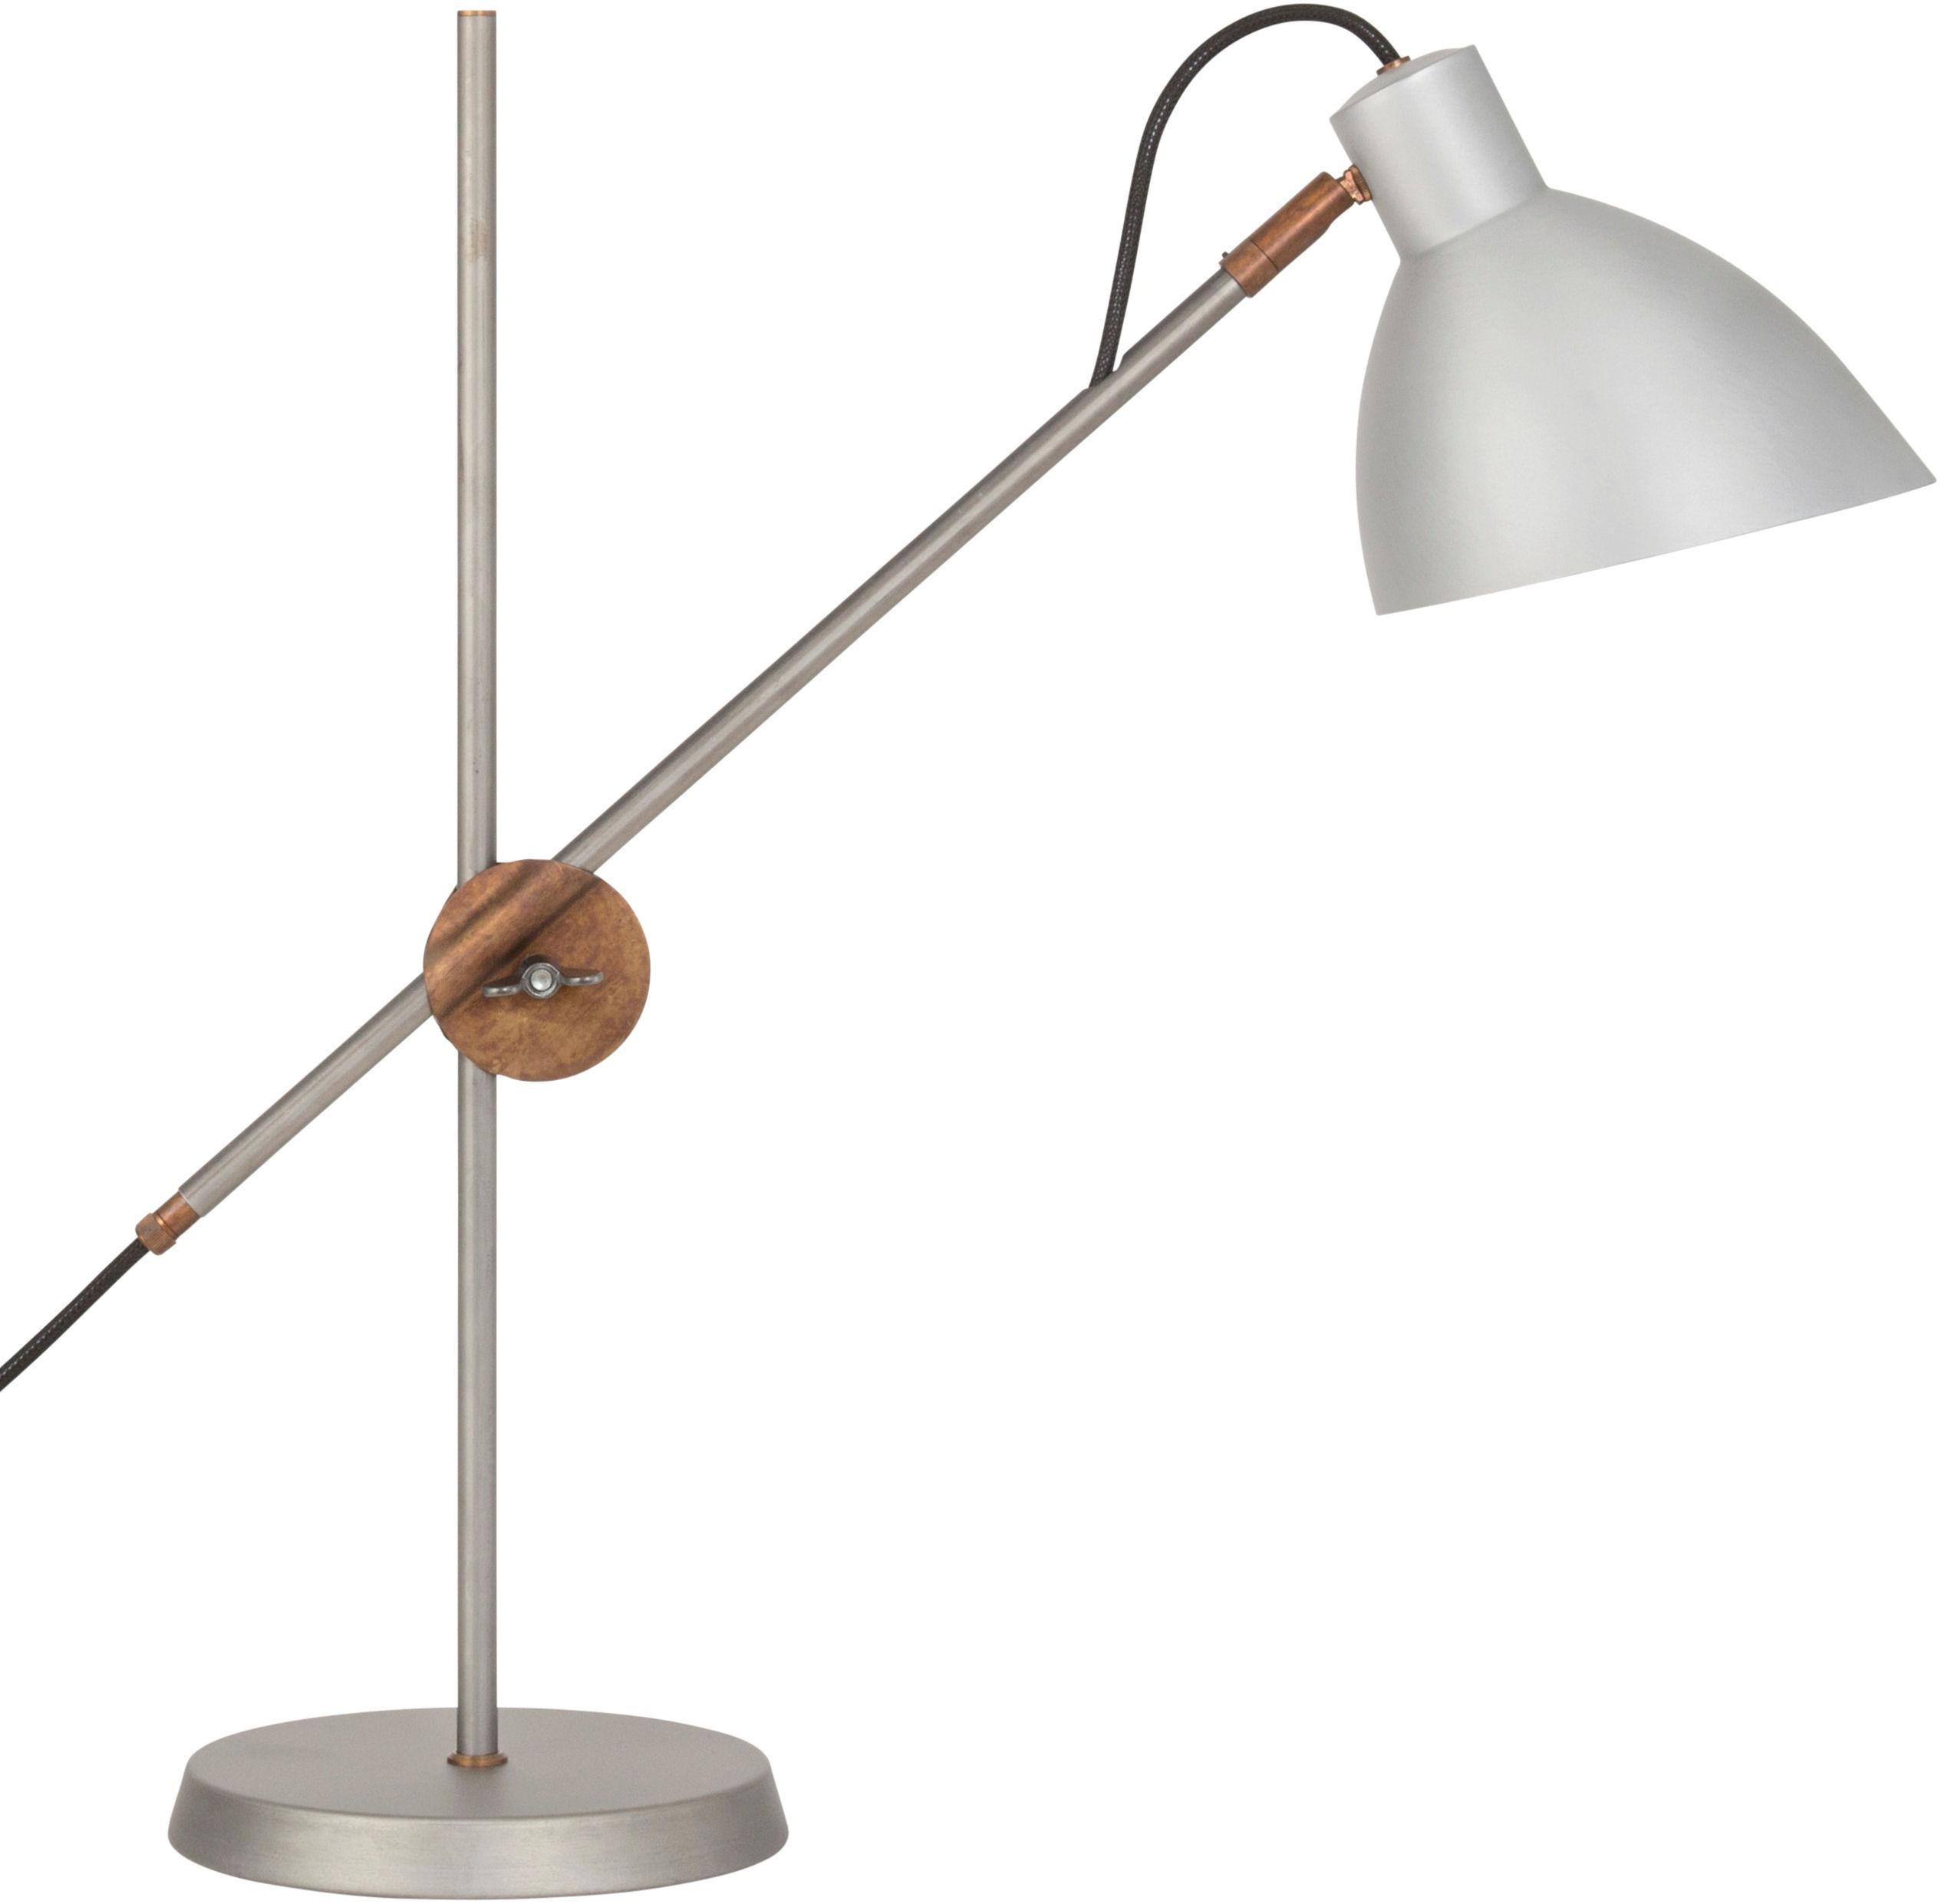 Table lamp model KH#1 designed by Konsthantverk in 1926 and manufactured actually by themselves.

The production of lamps, wall lights and floor lamps are manufactured using craftsman’s techniques with the same materials and techniques as the first